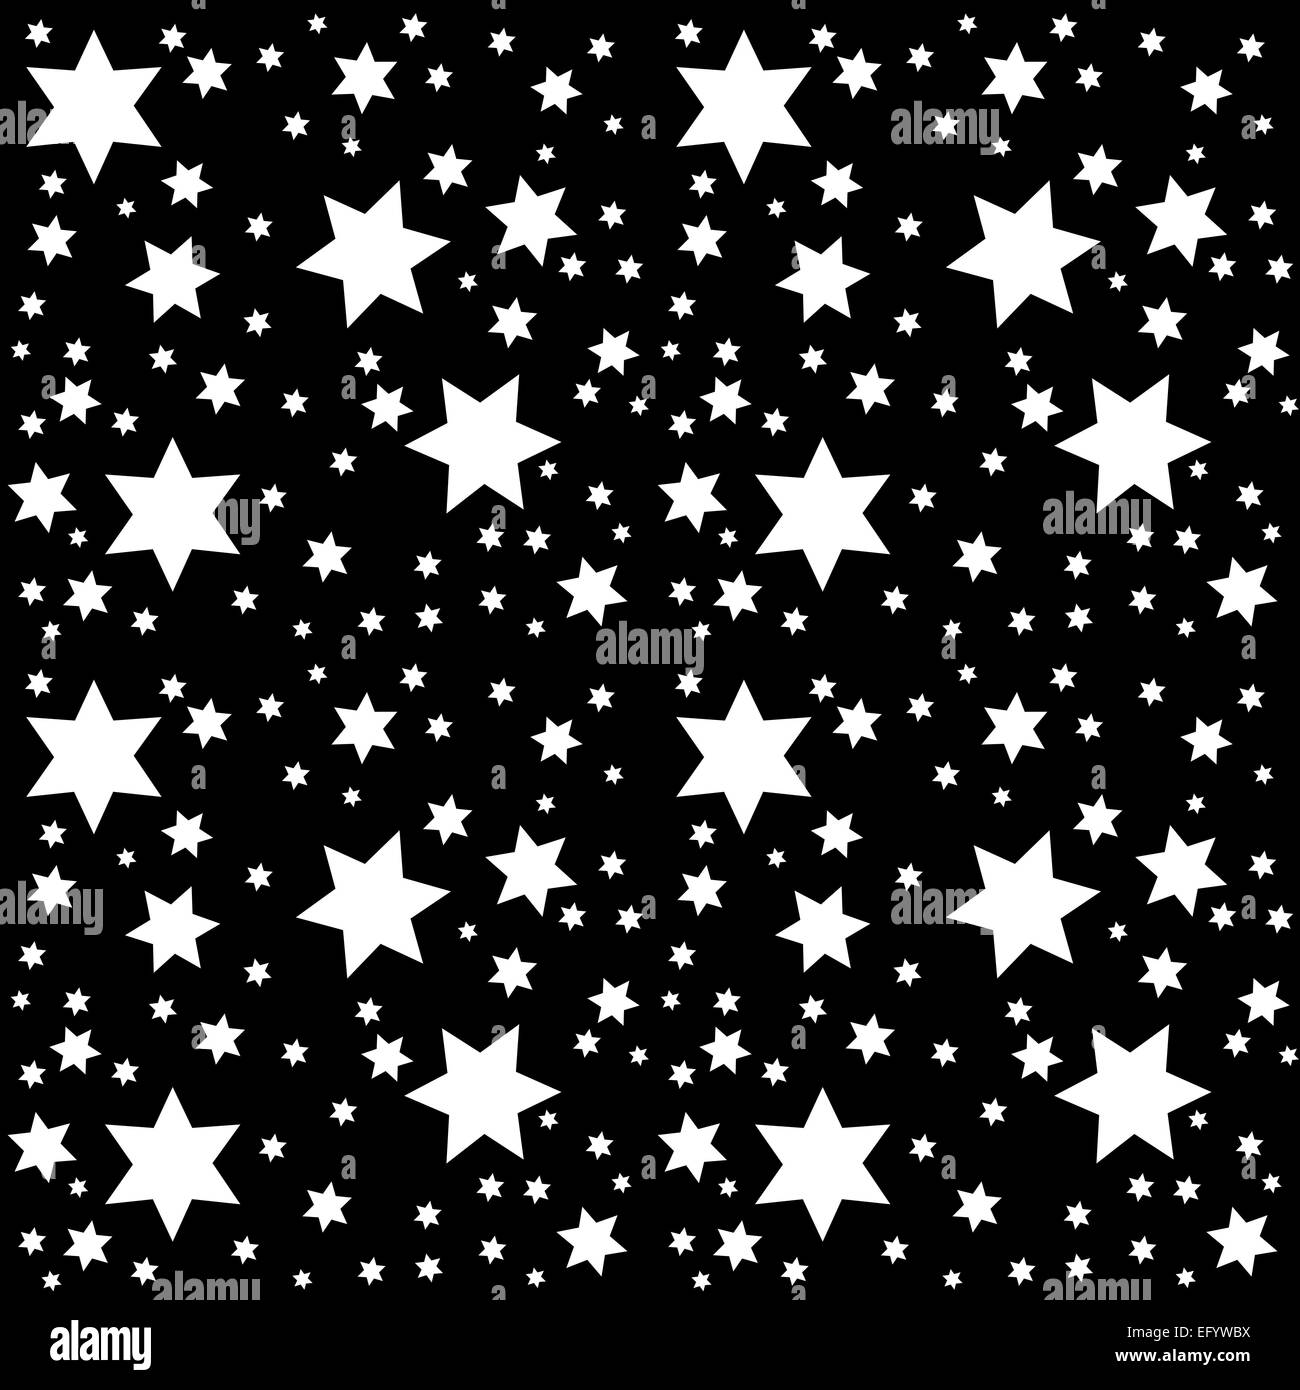 Space. Starry Sky with the Moon. Vector Illustration. Stock Photo